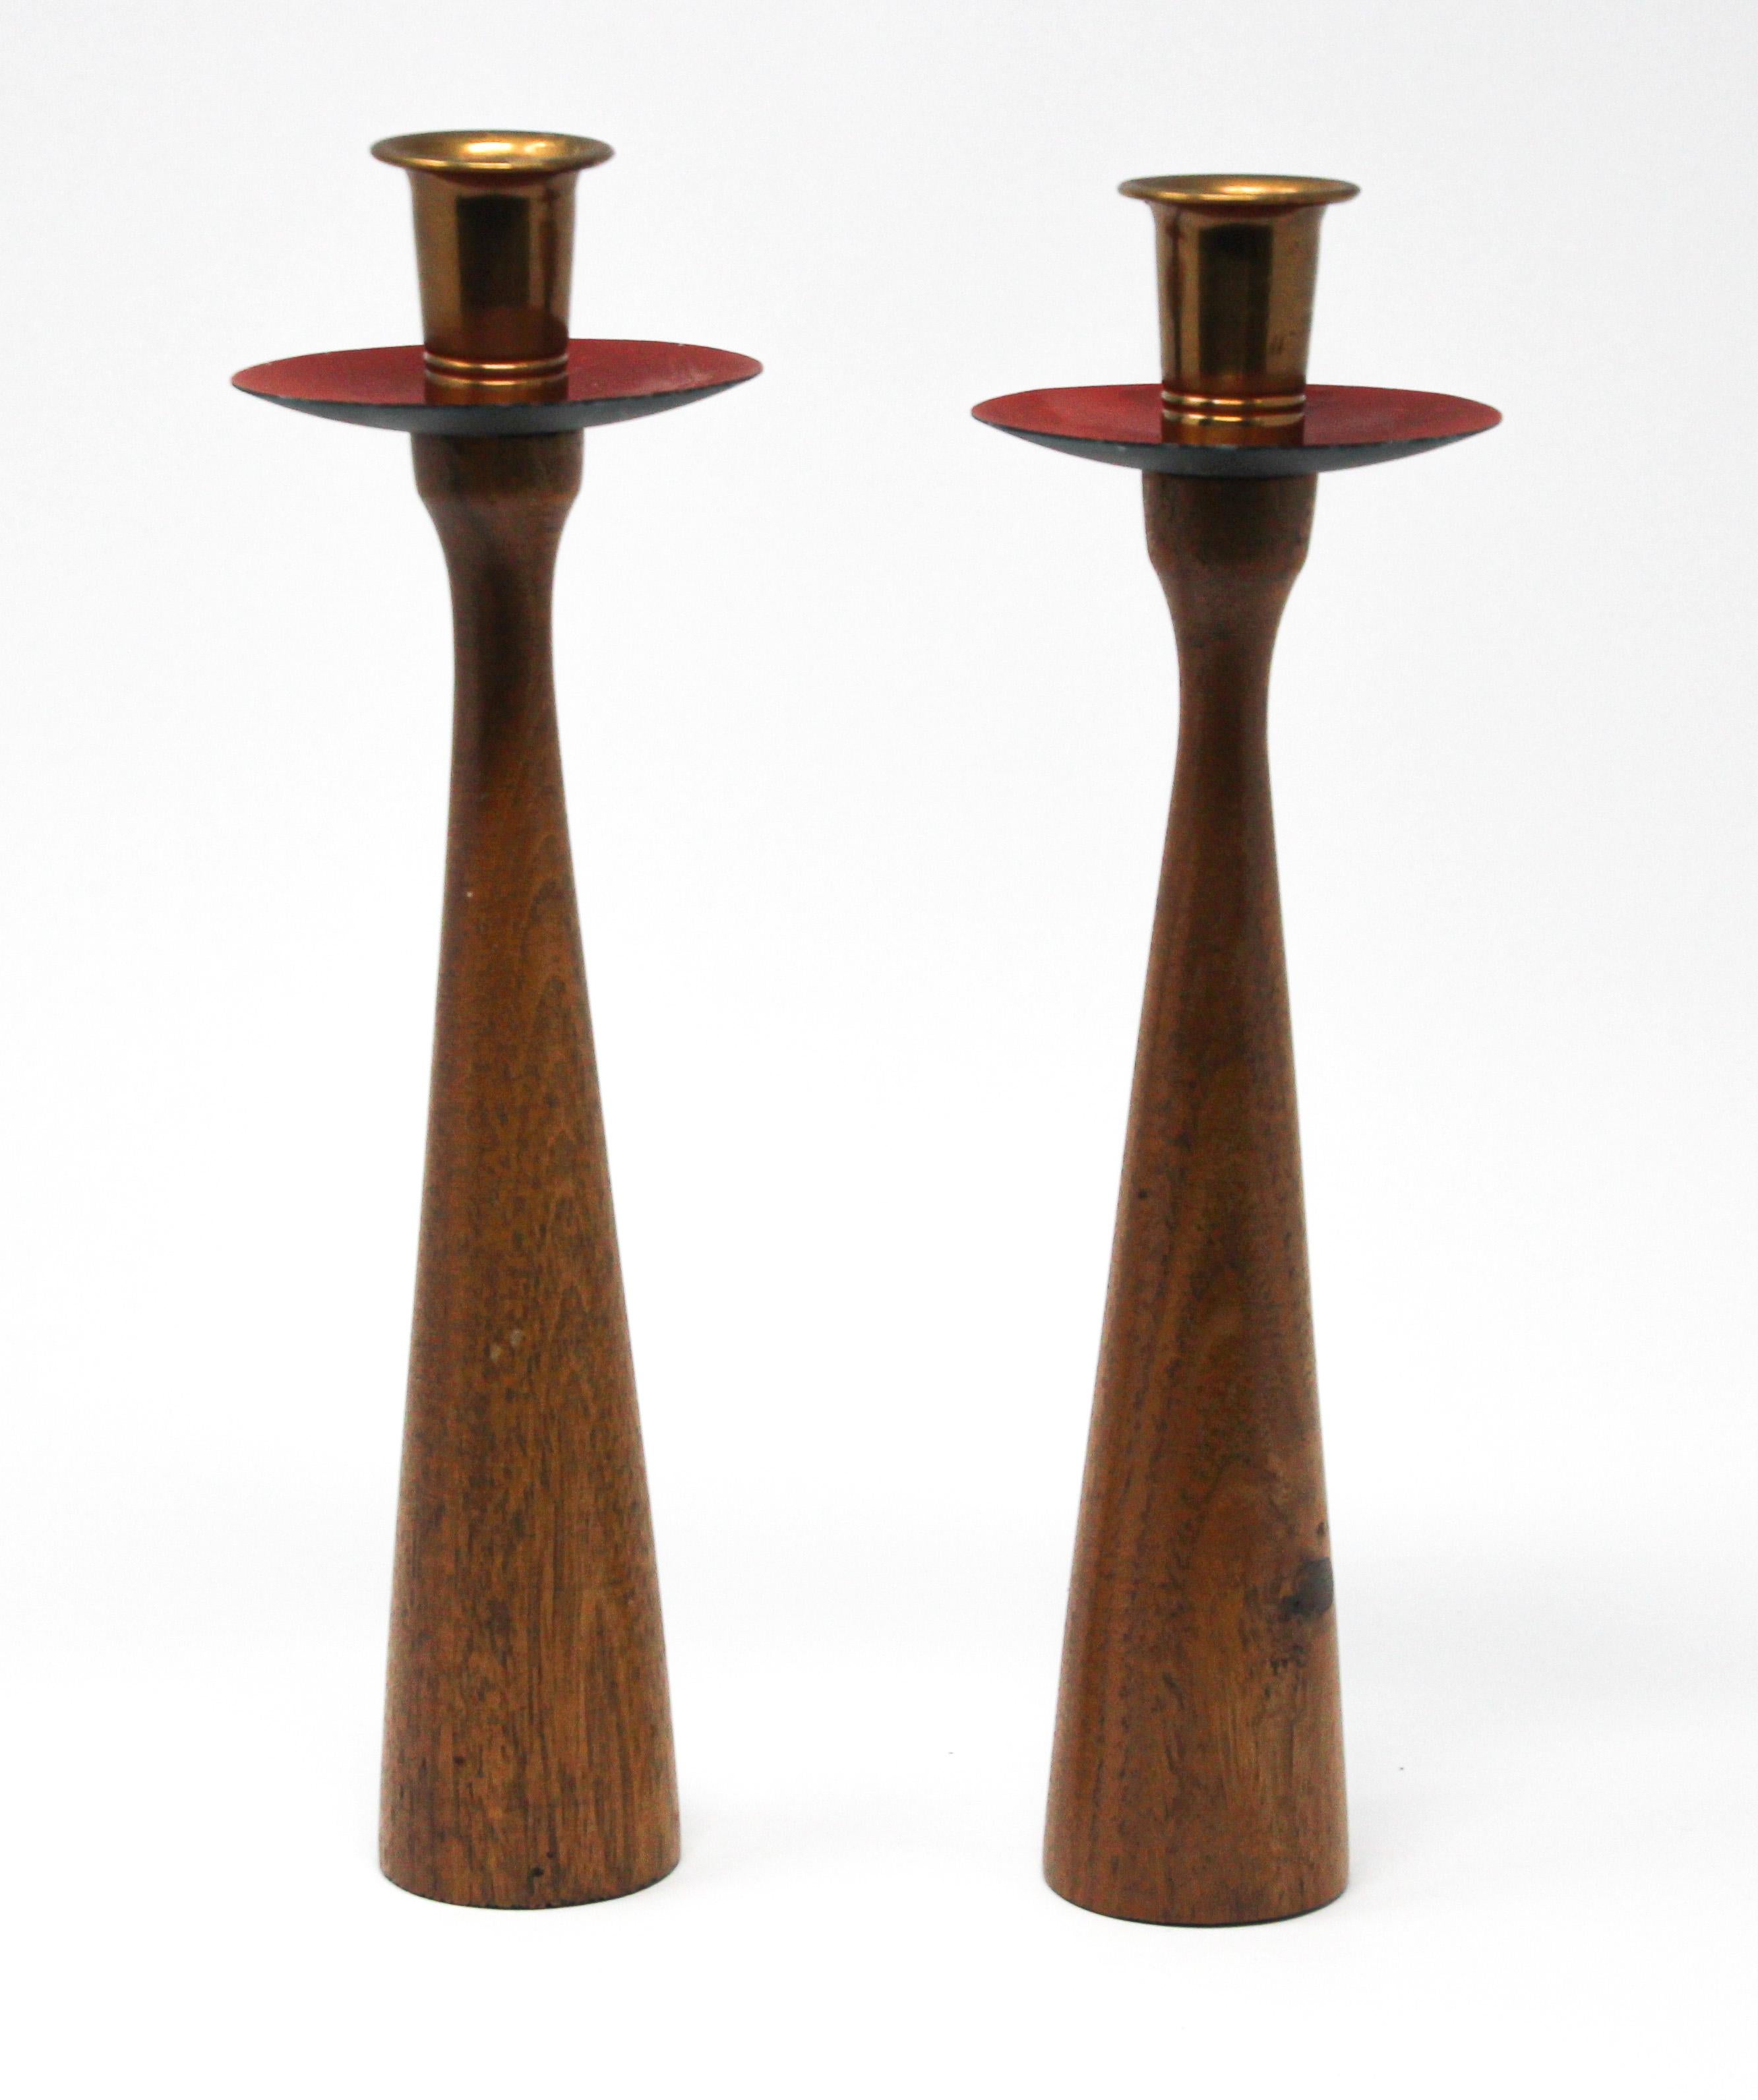 Midcentury Danish modern teak and brass candleholders in Rude Osolnik style.
Midcentury handcrafted teak candlestick holders.
These elegant candlesticks are unique and are in excellent vintage condition.
Vintage teak pair of candle holders with